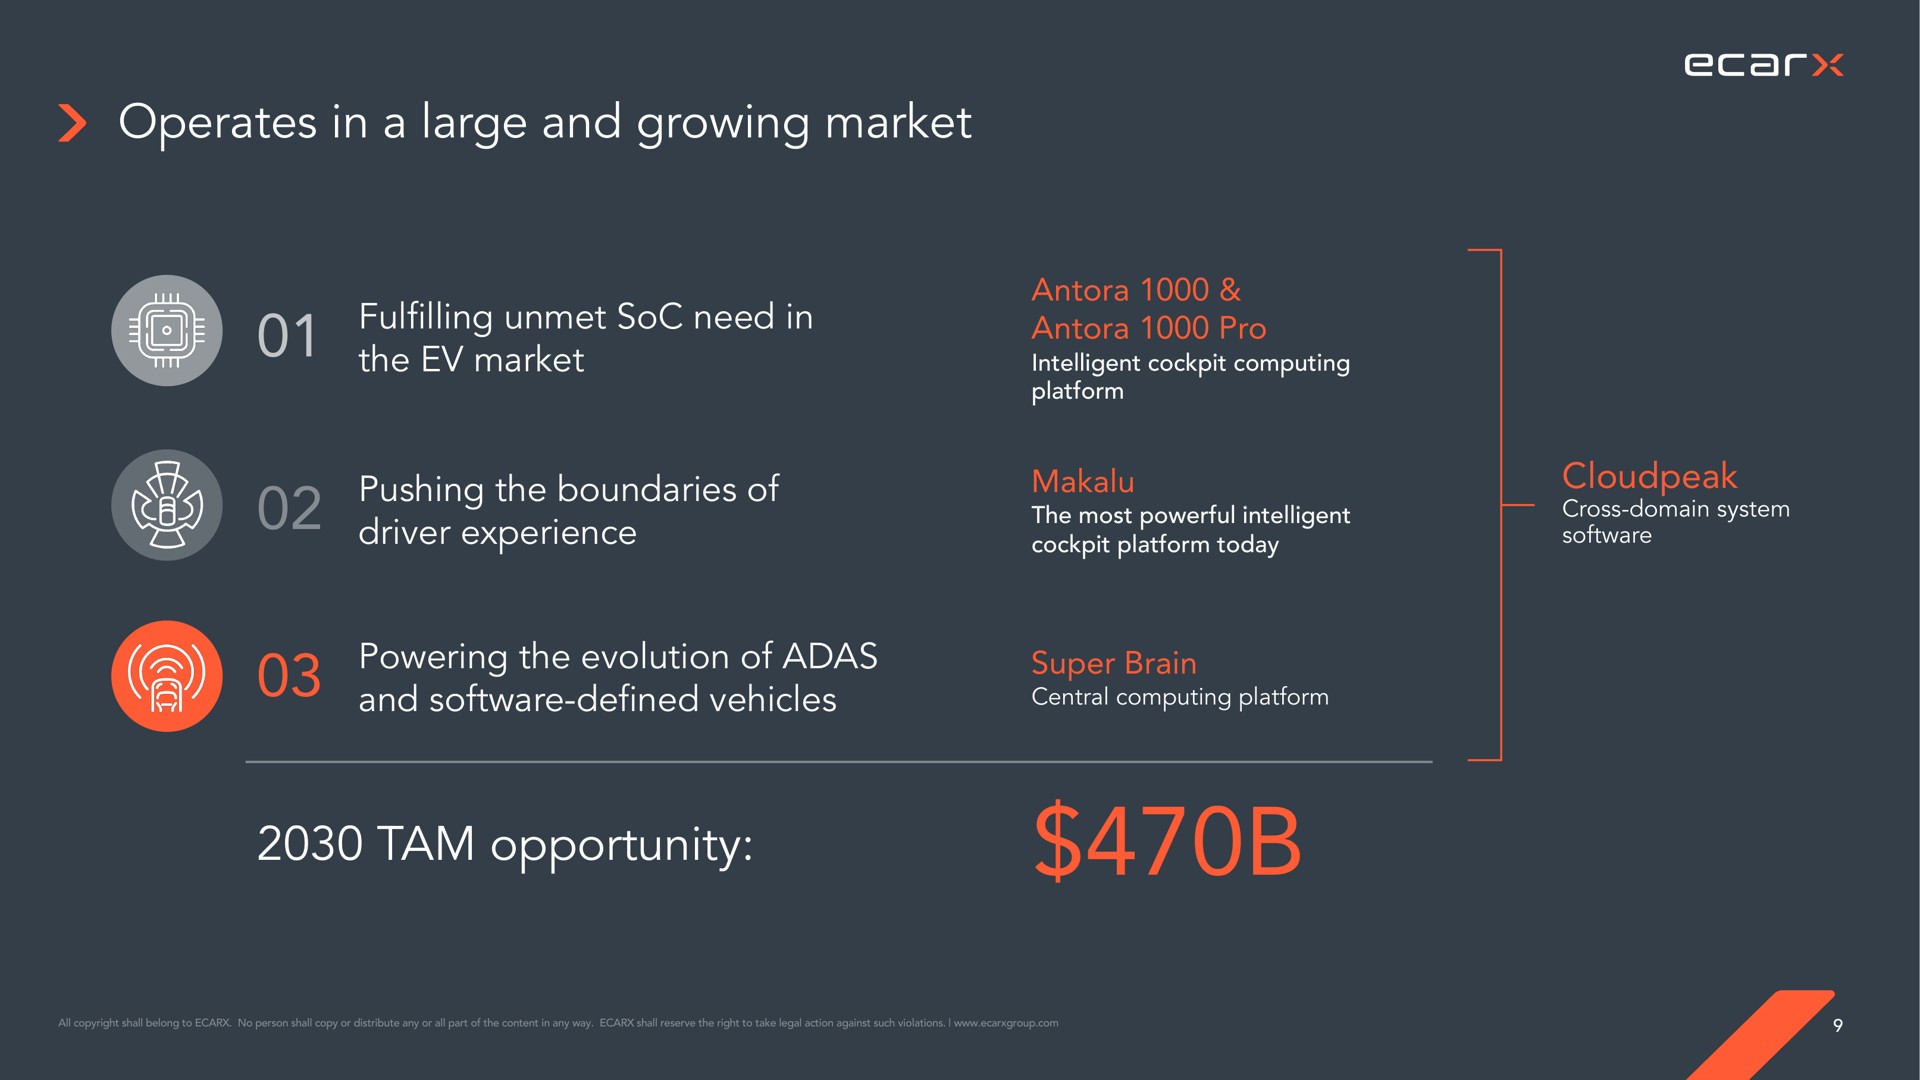 operates in a large and growing market unmet soc need in the market pushing the boundaries of driver experience powering the evolution of and defined vehicles tam opportunity | Ecarx